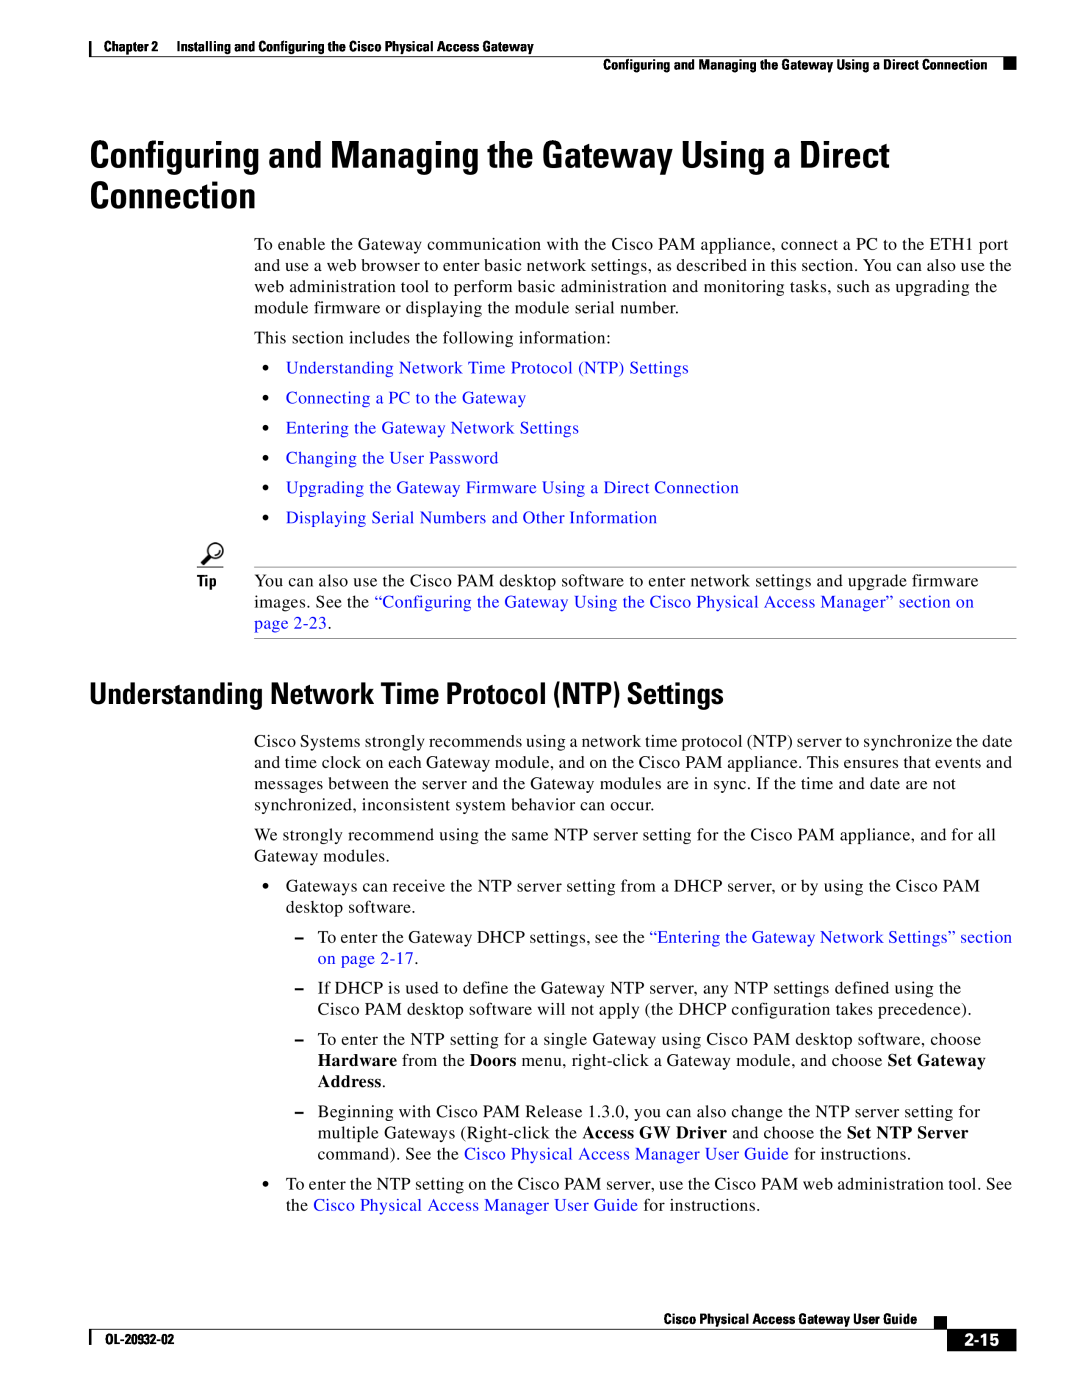 Cisco Systems OL-20932-02 Configuring and Managing the Gateway Using a Direct Connection, Changing the User Password, 2-15 